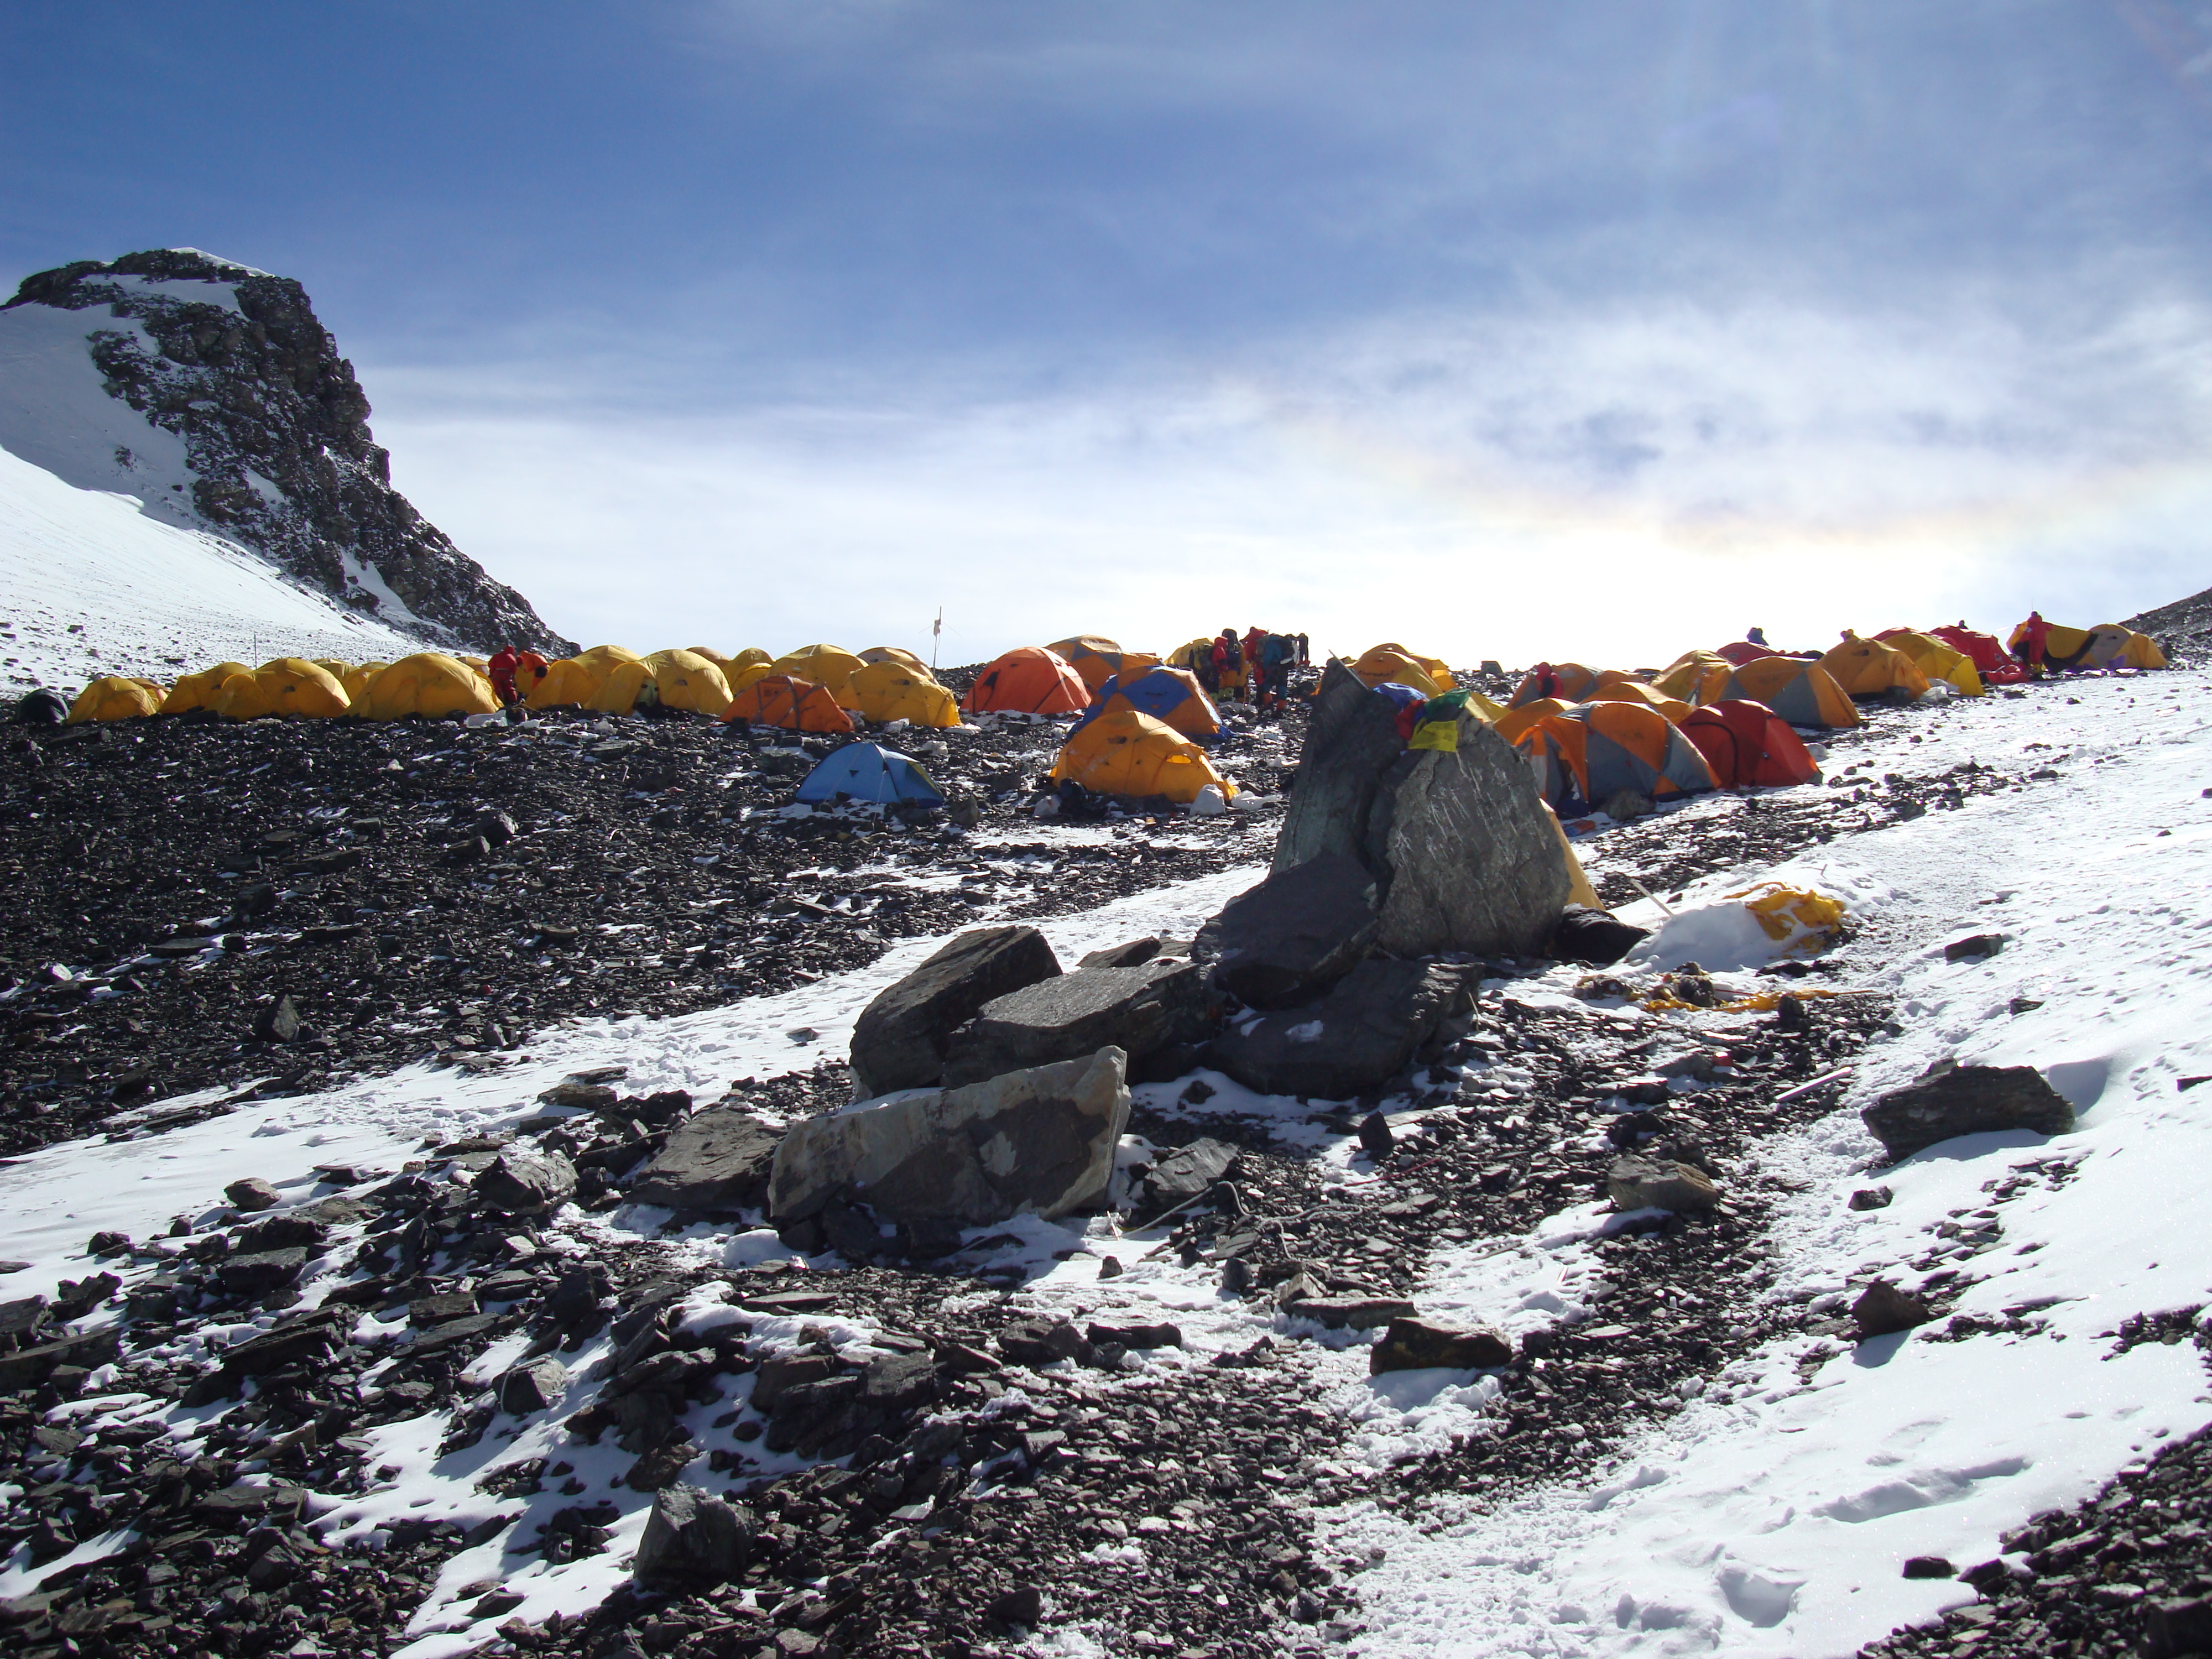 Tents on the South Col of Mount Everest